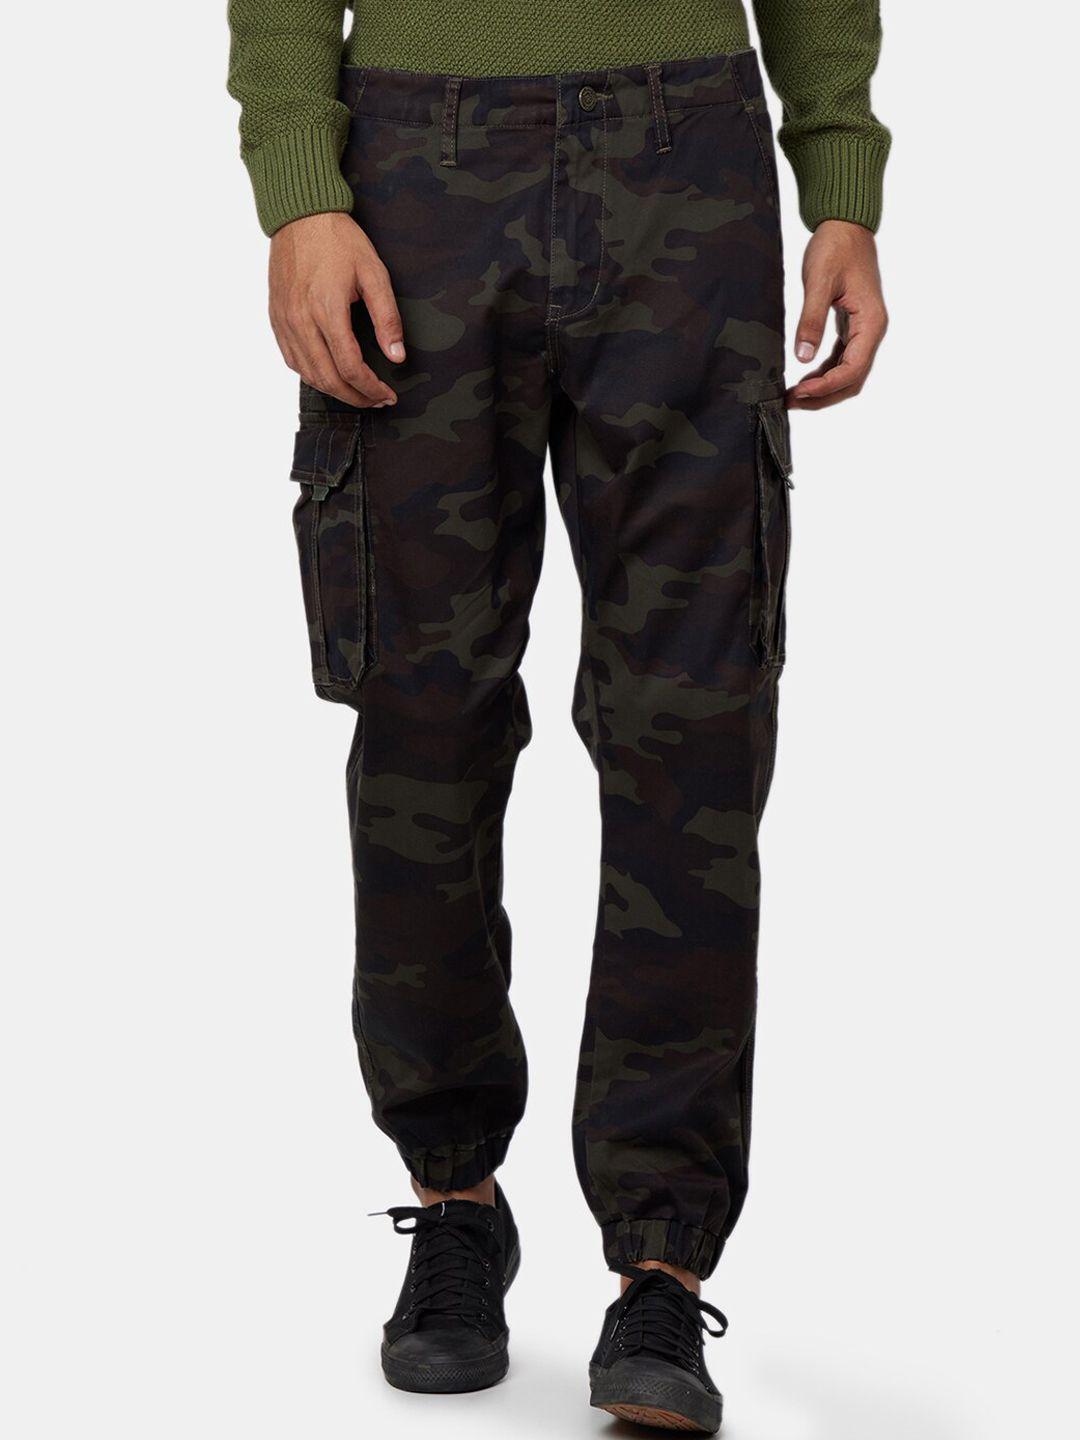 royal enfield men brown camouflage printed cotton cargos trousers